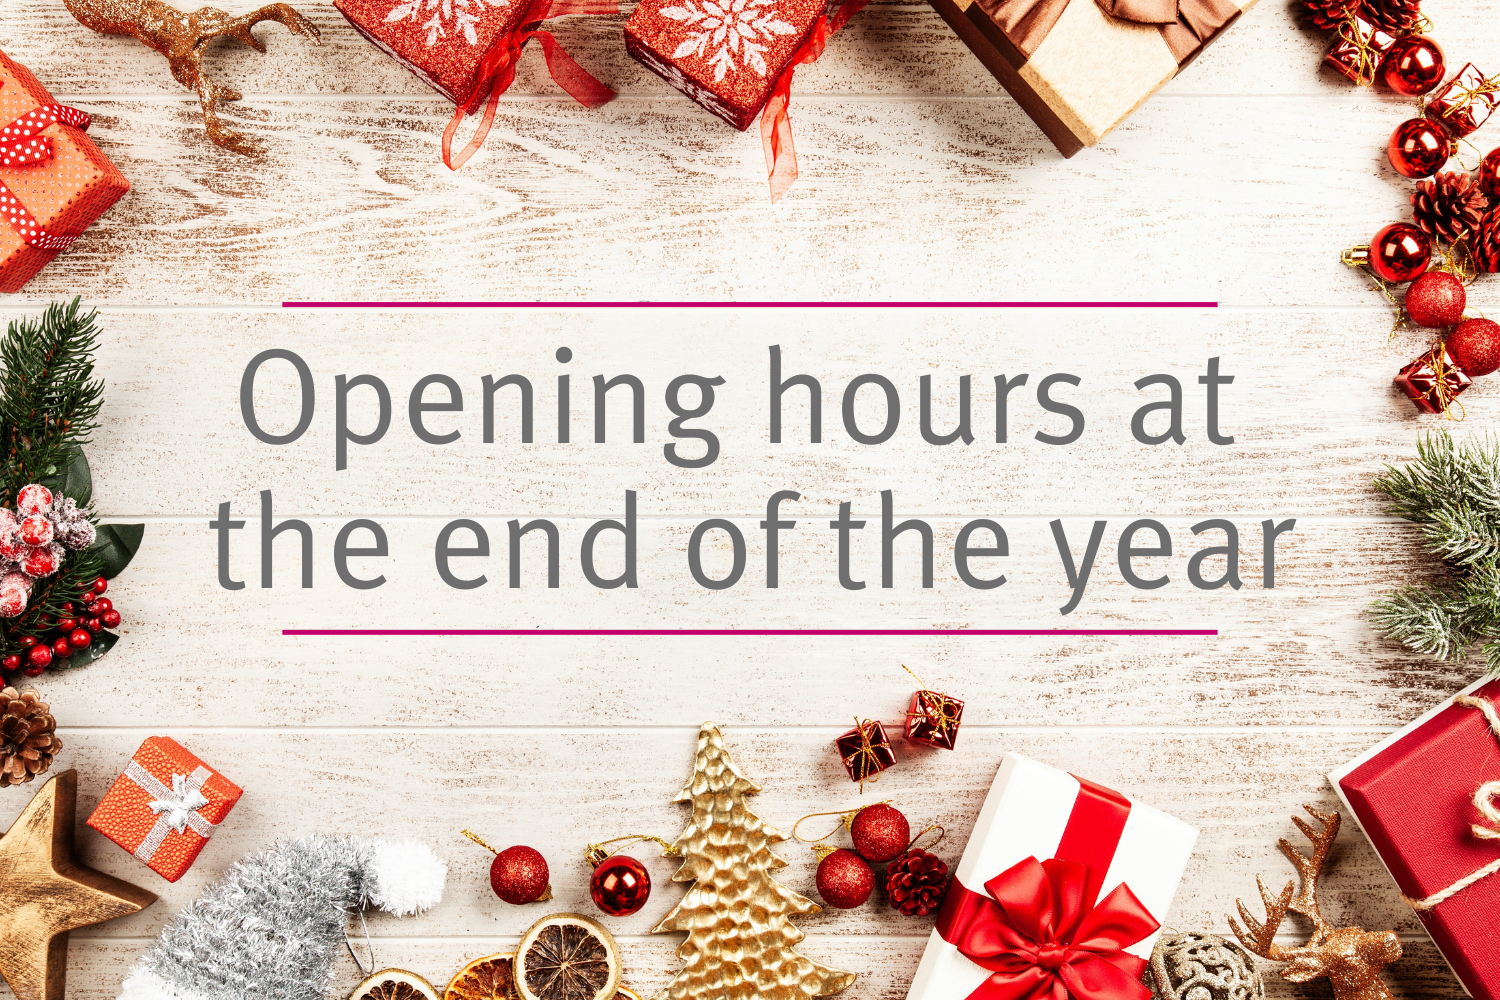 Opening hours at the end of the year